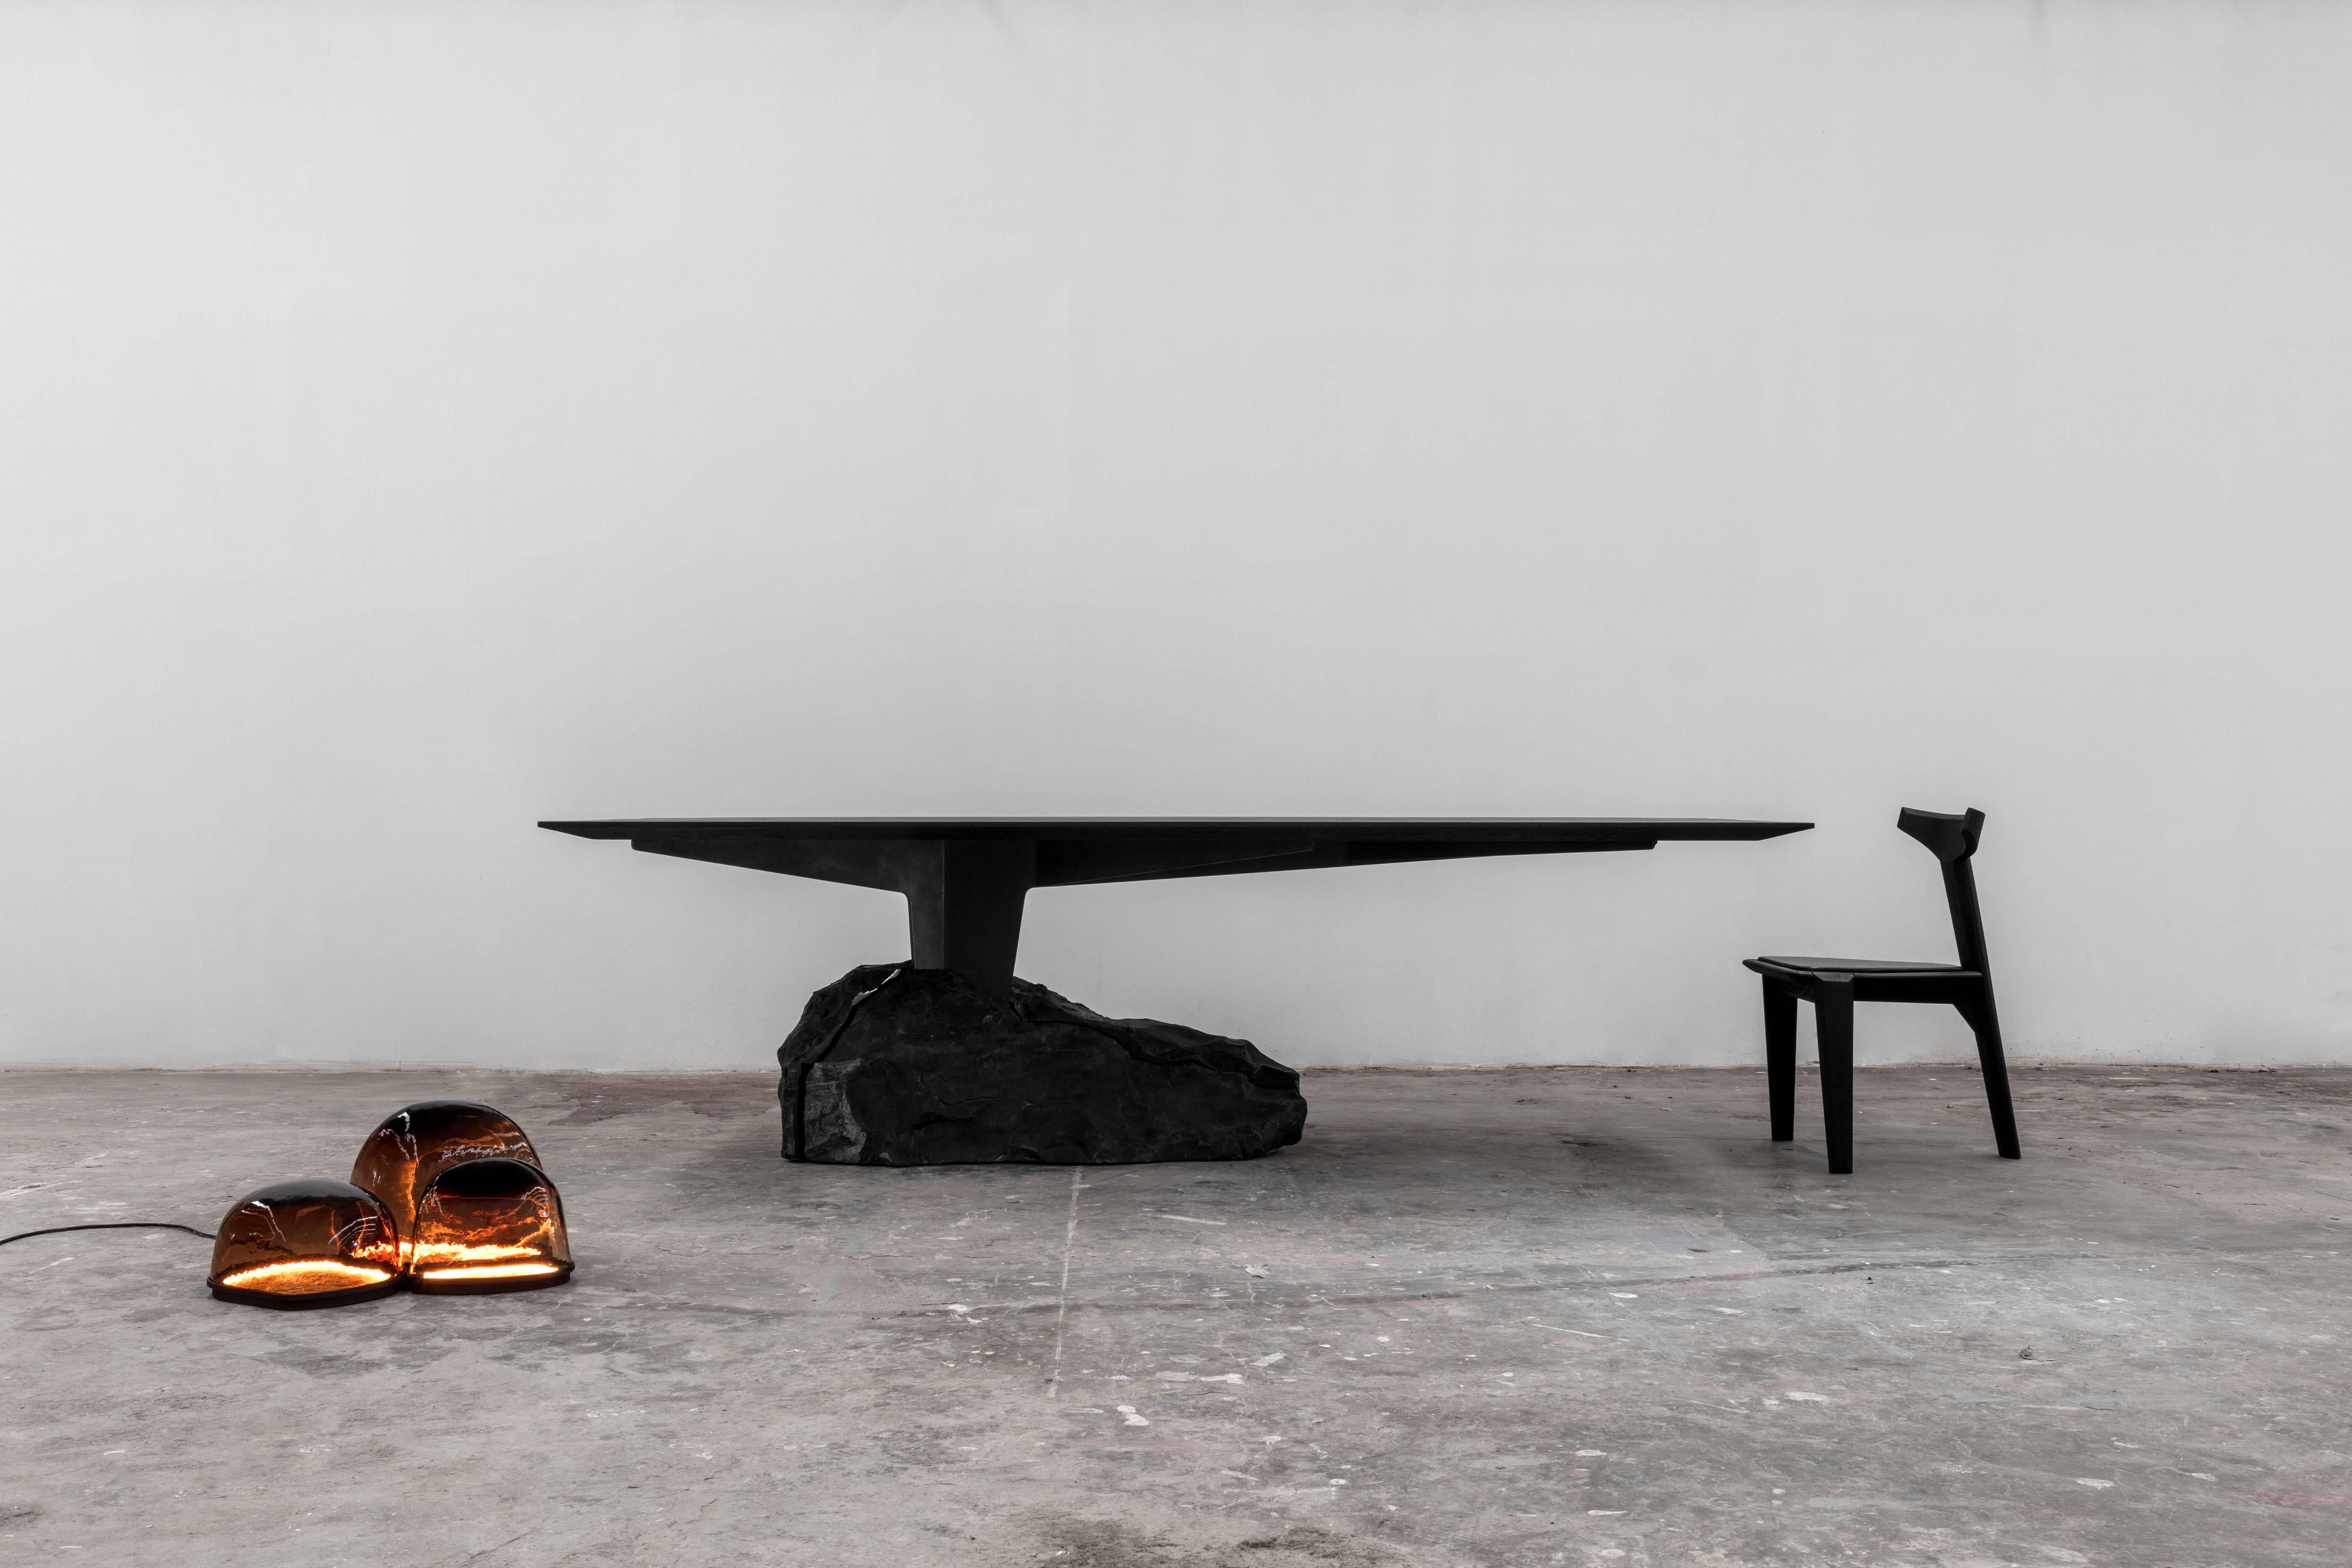 Blackened Magma Floor Lamp, Volcanic Stone, Contemporary Alquimia Collection For Sale